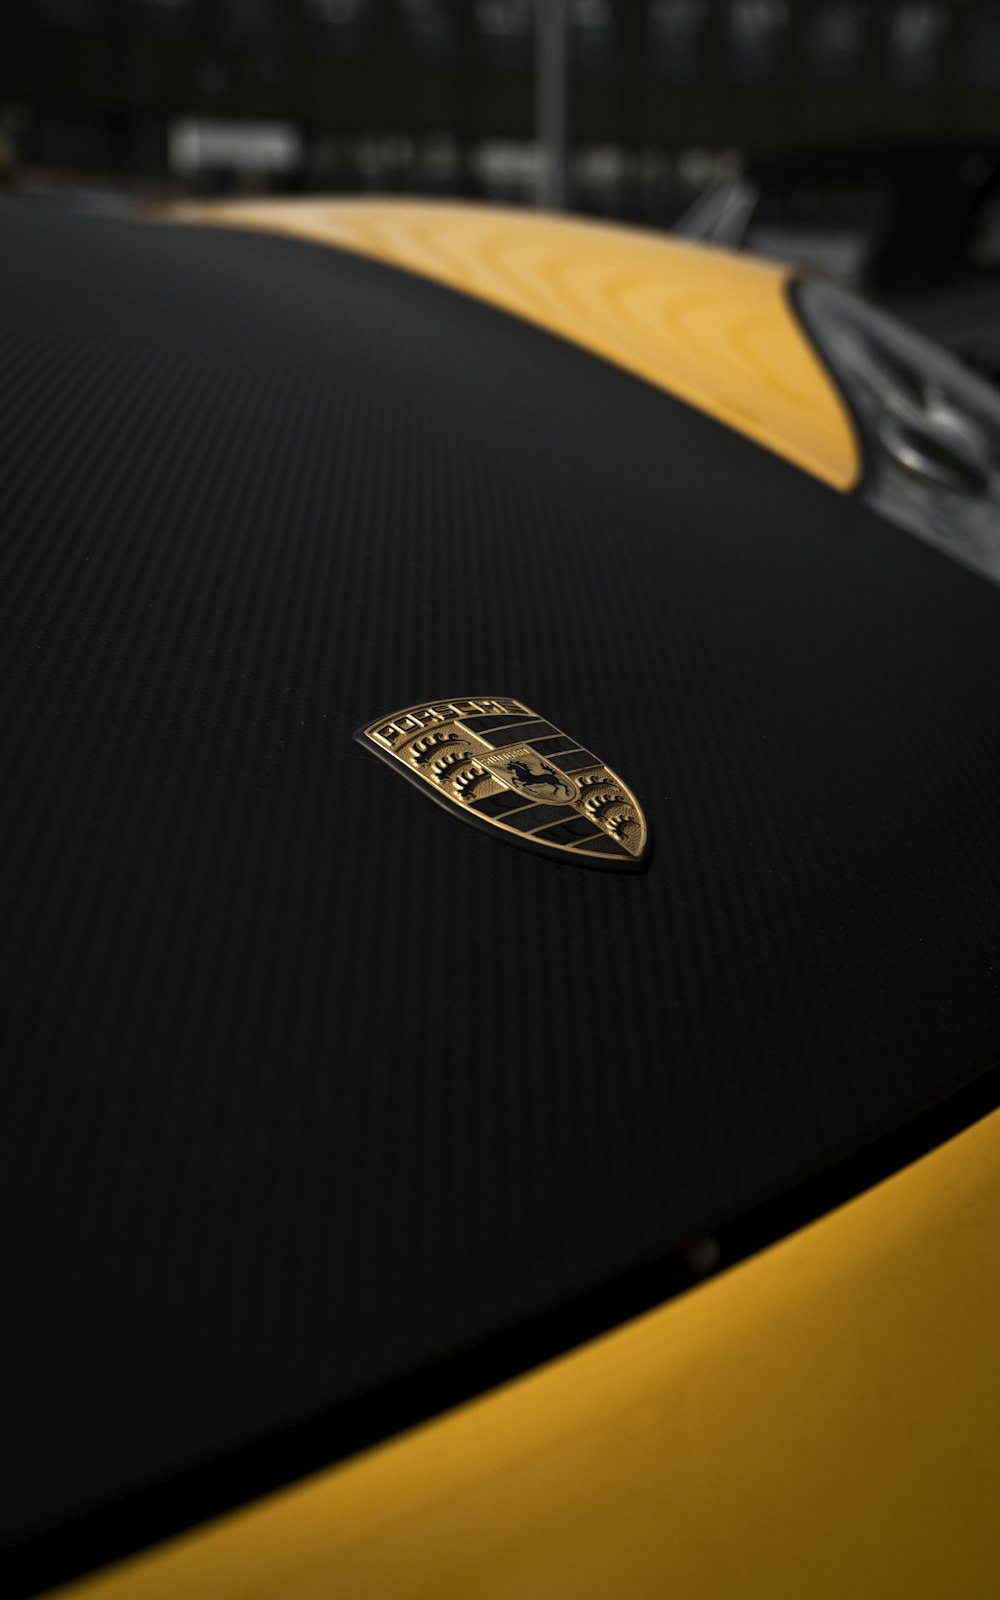 a close up of the hood of a yellow sports car